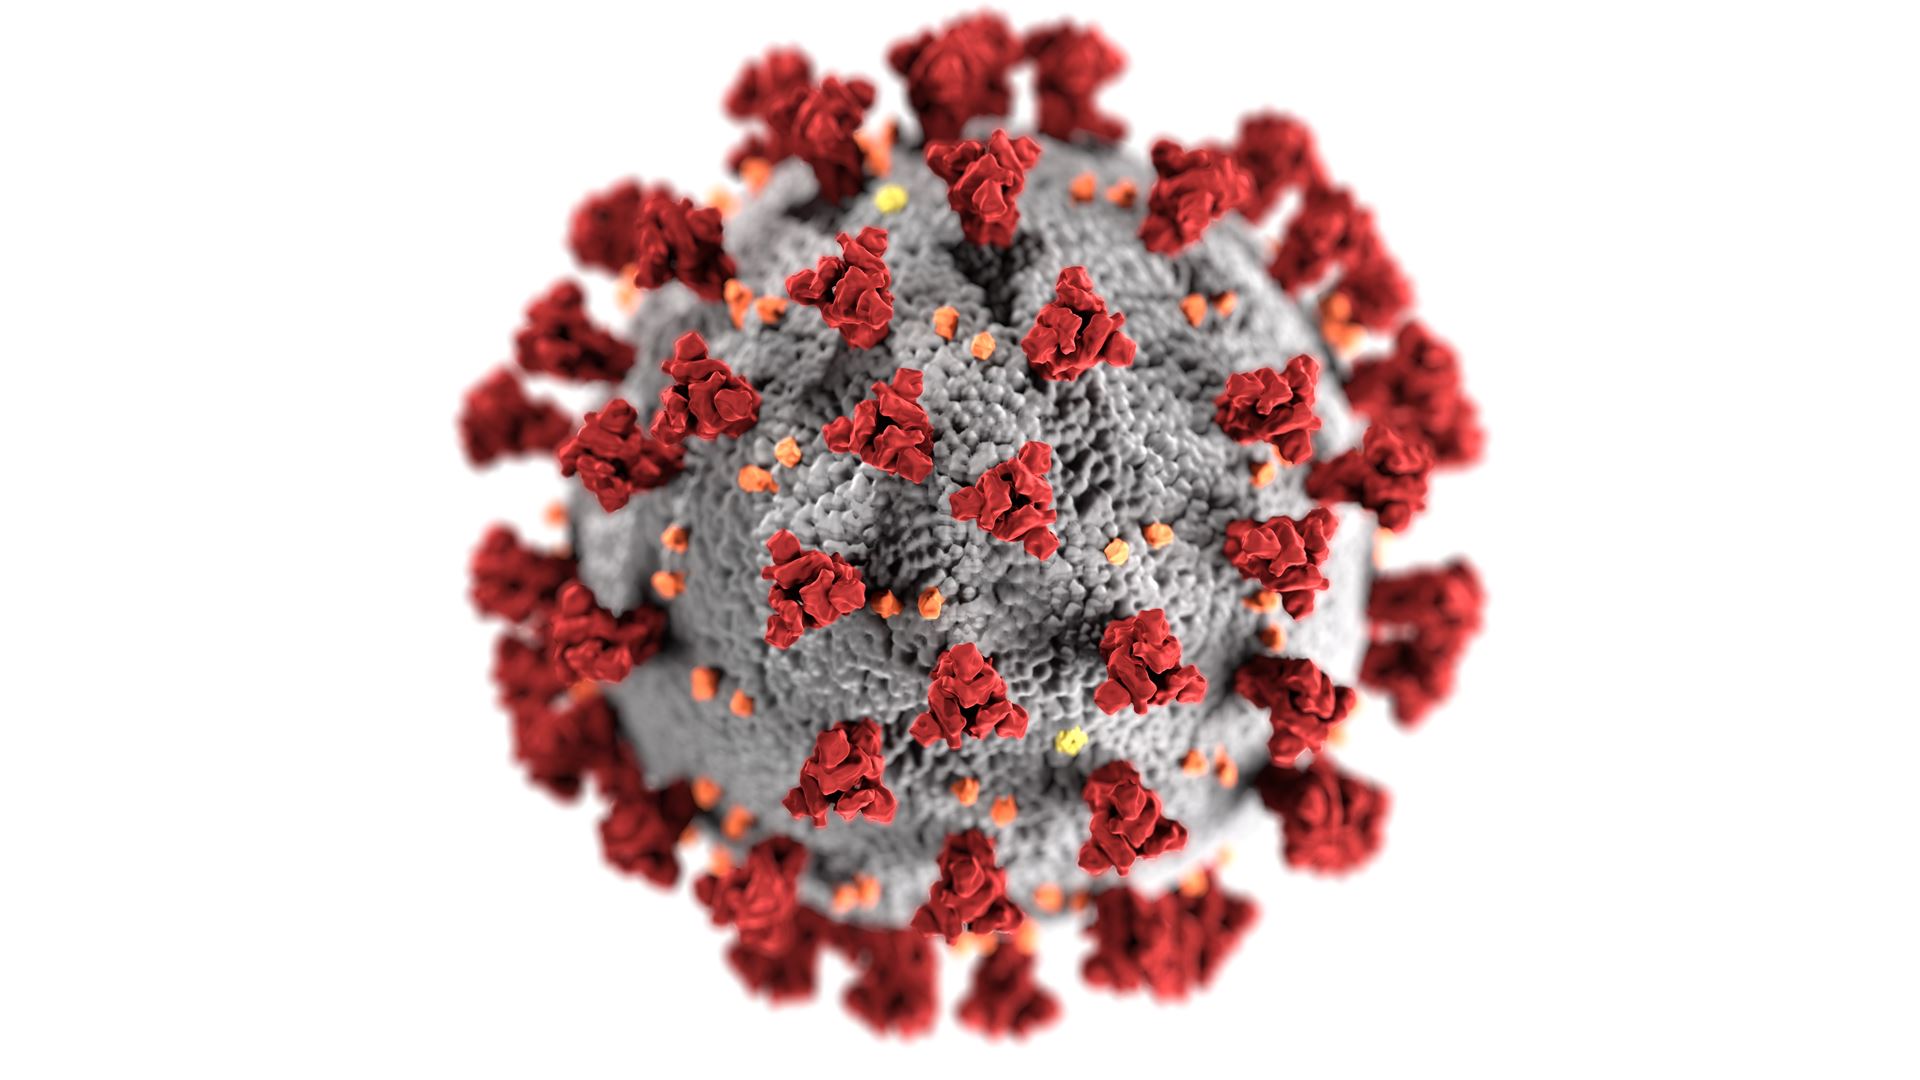 Image of a virus against a white background